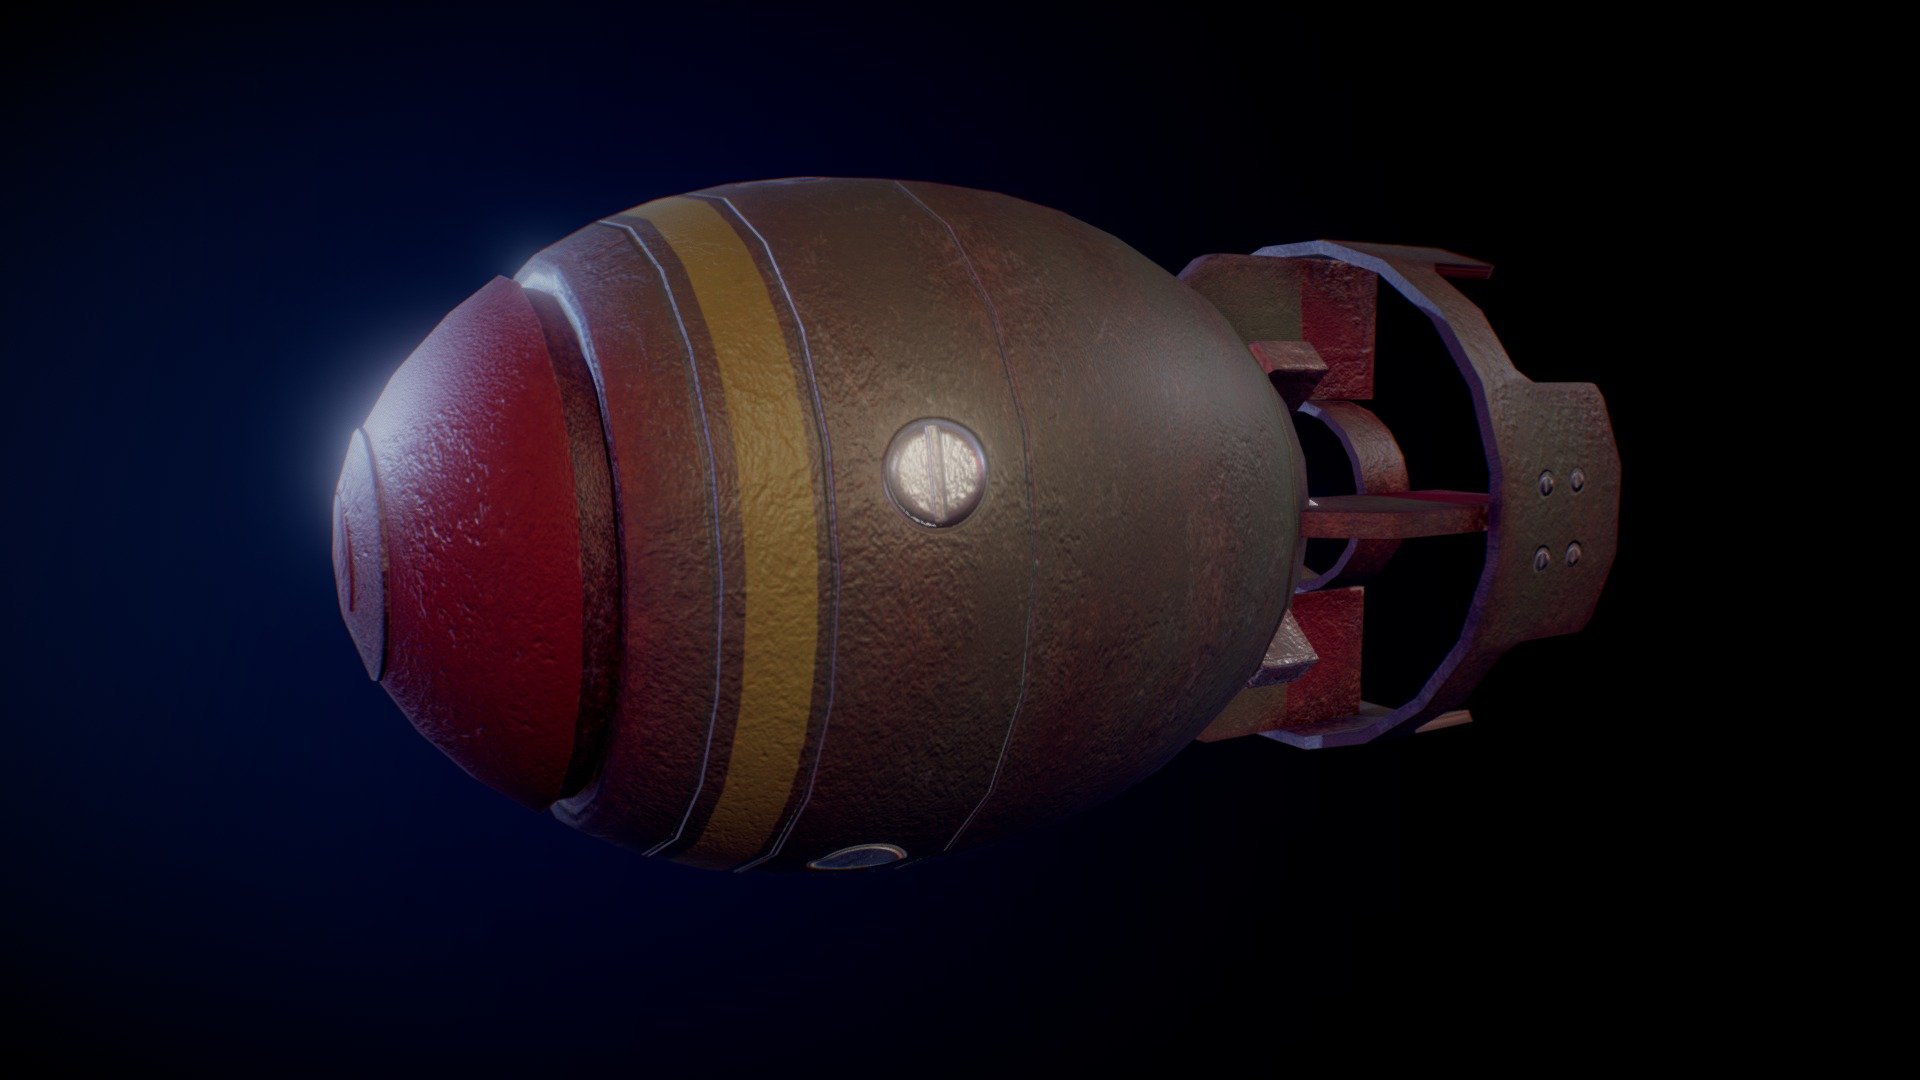 Lowpoly Mini Nuke from the Fallout franchise. Modeling was done in Maya and texturing in Substance Painter 3d model